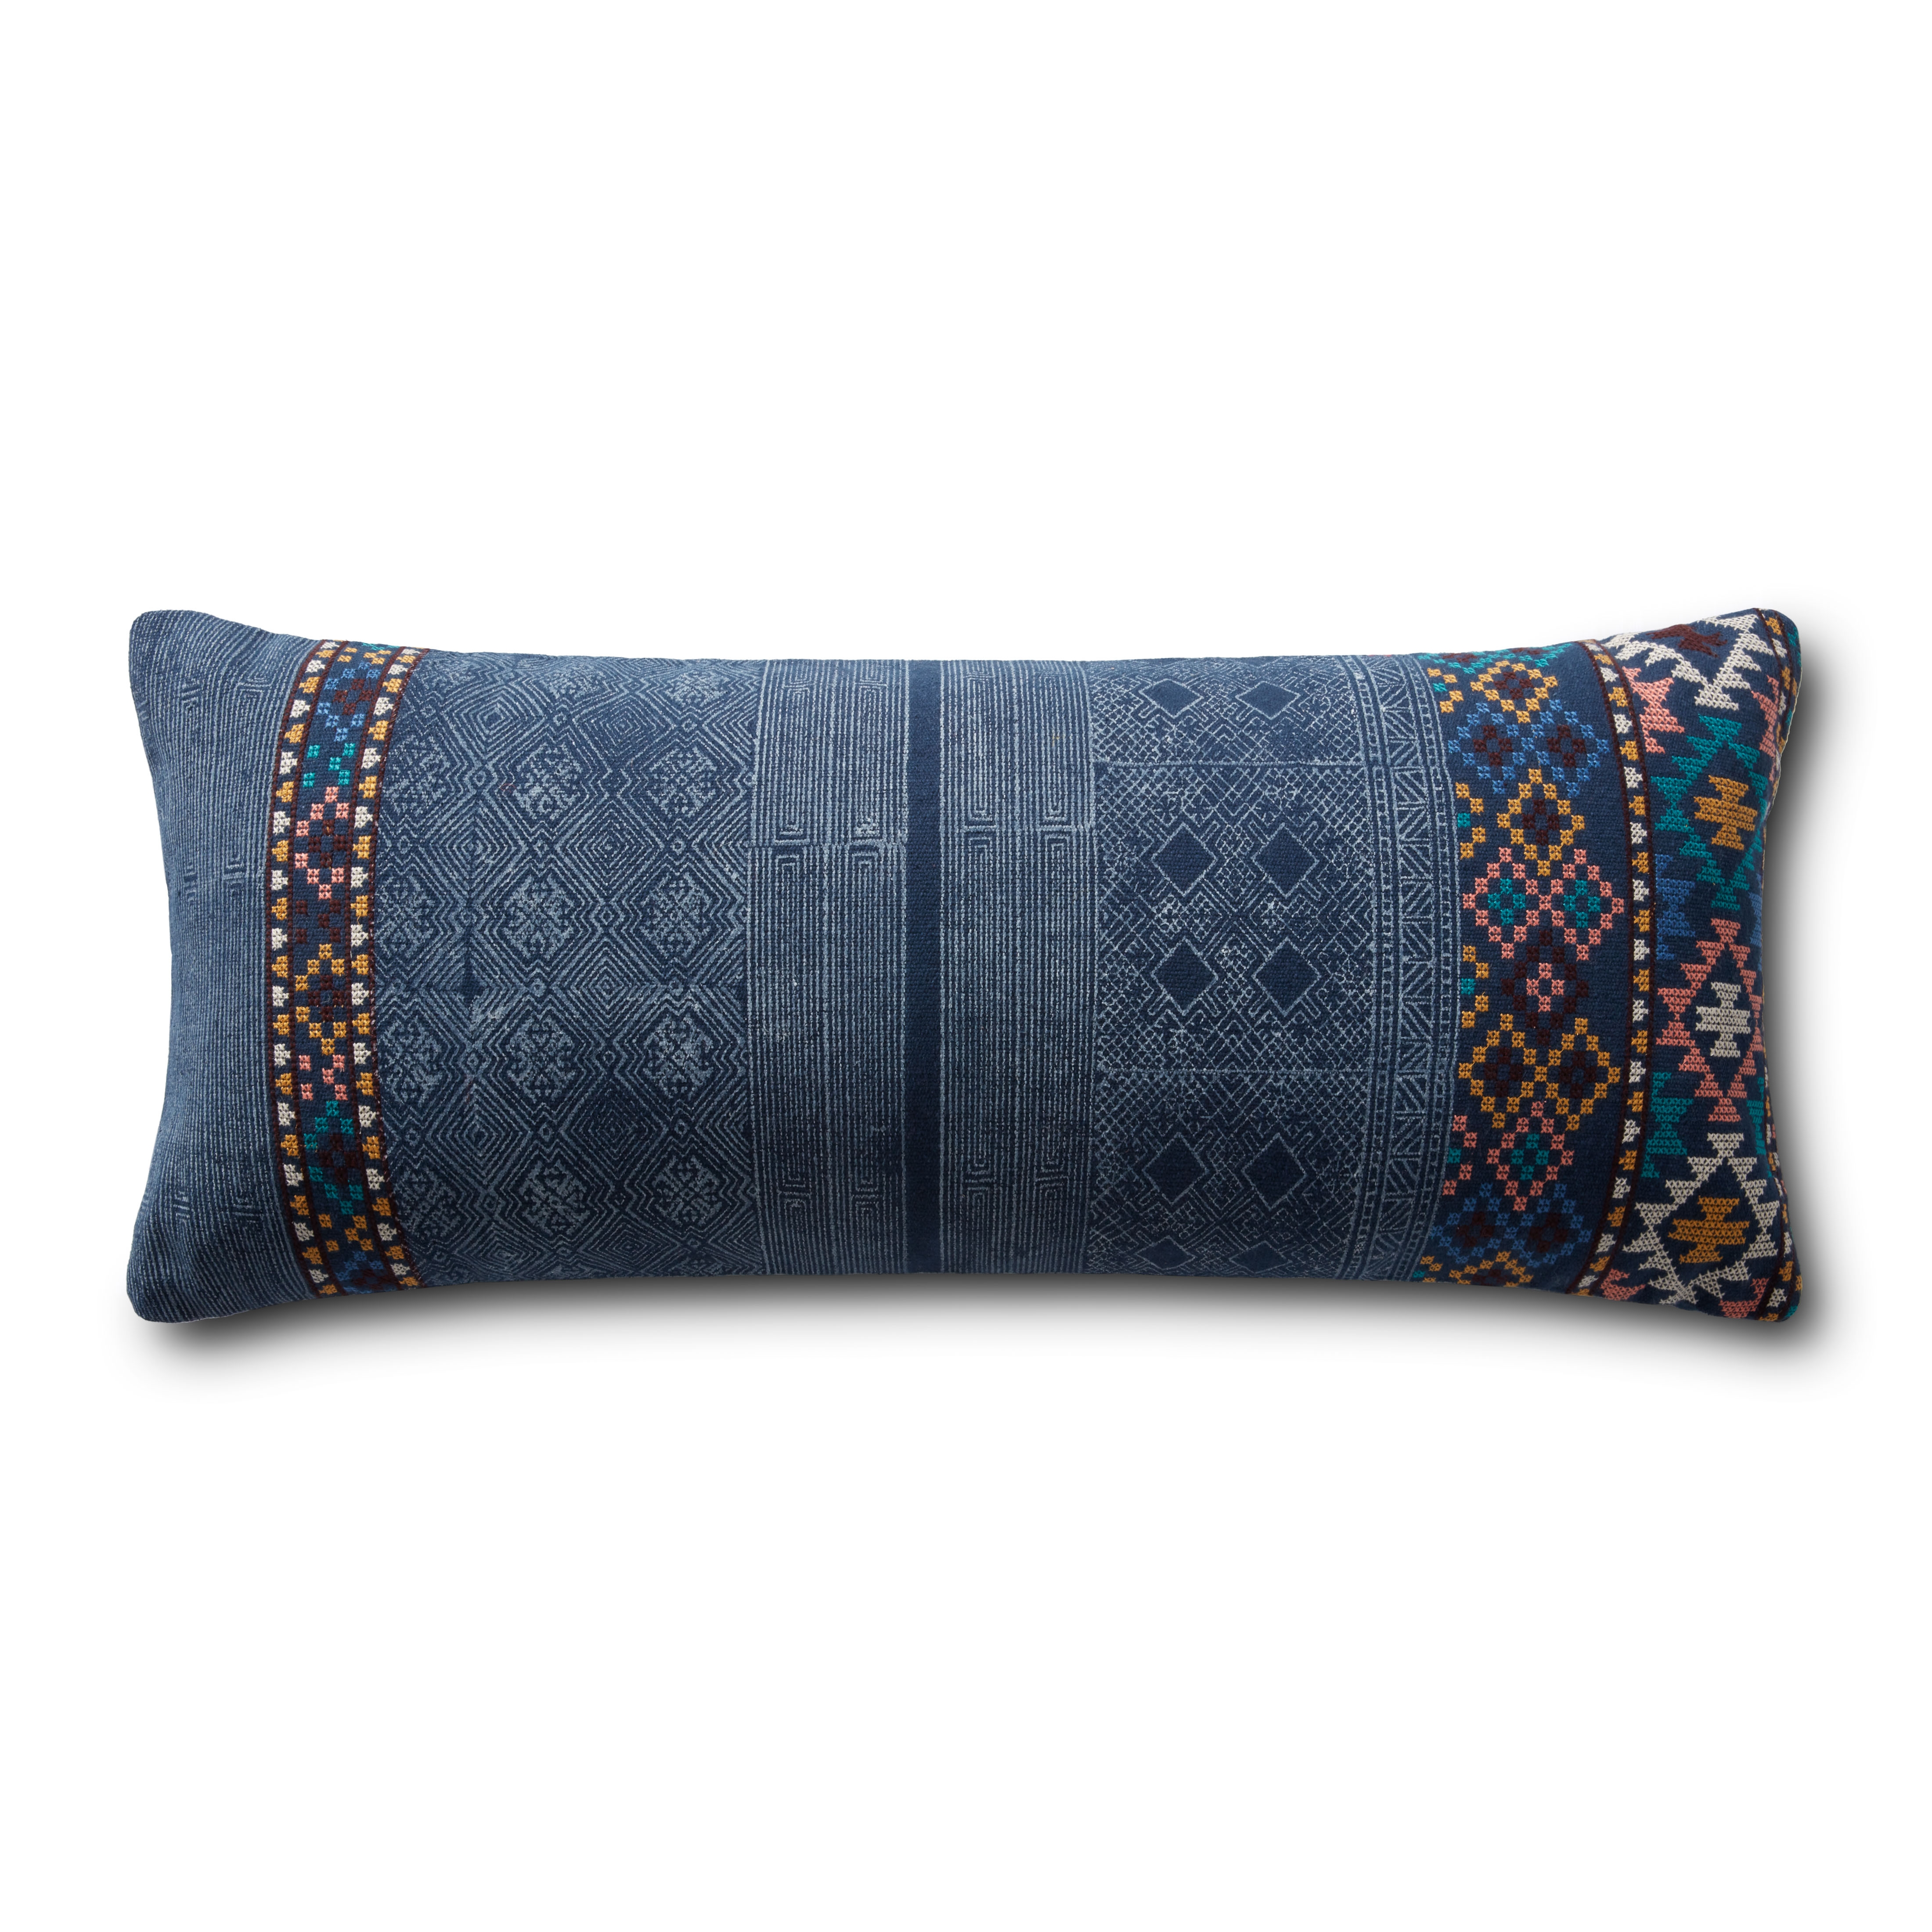 PILLOWS P0969 NAVY / MULTI 13" x 35" Cover w/Down - Image 0